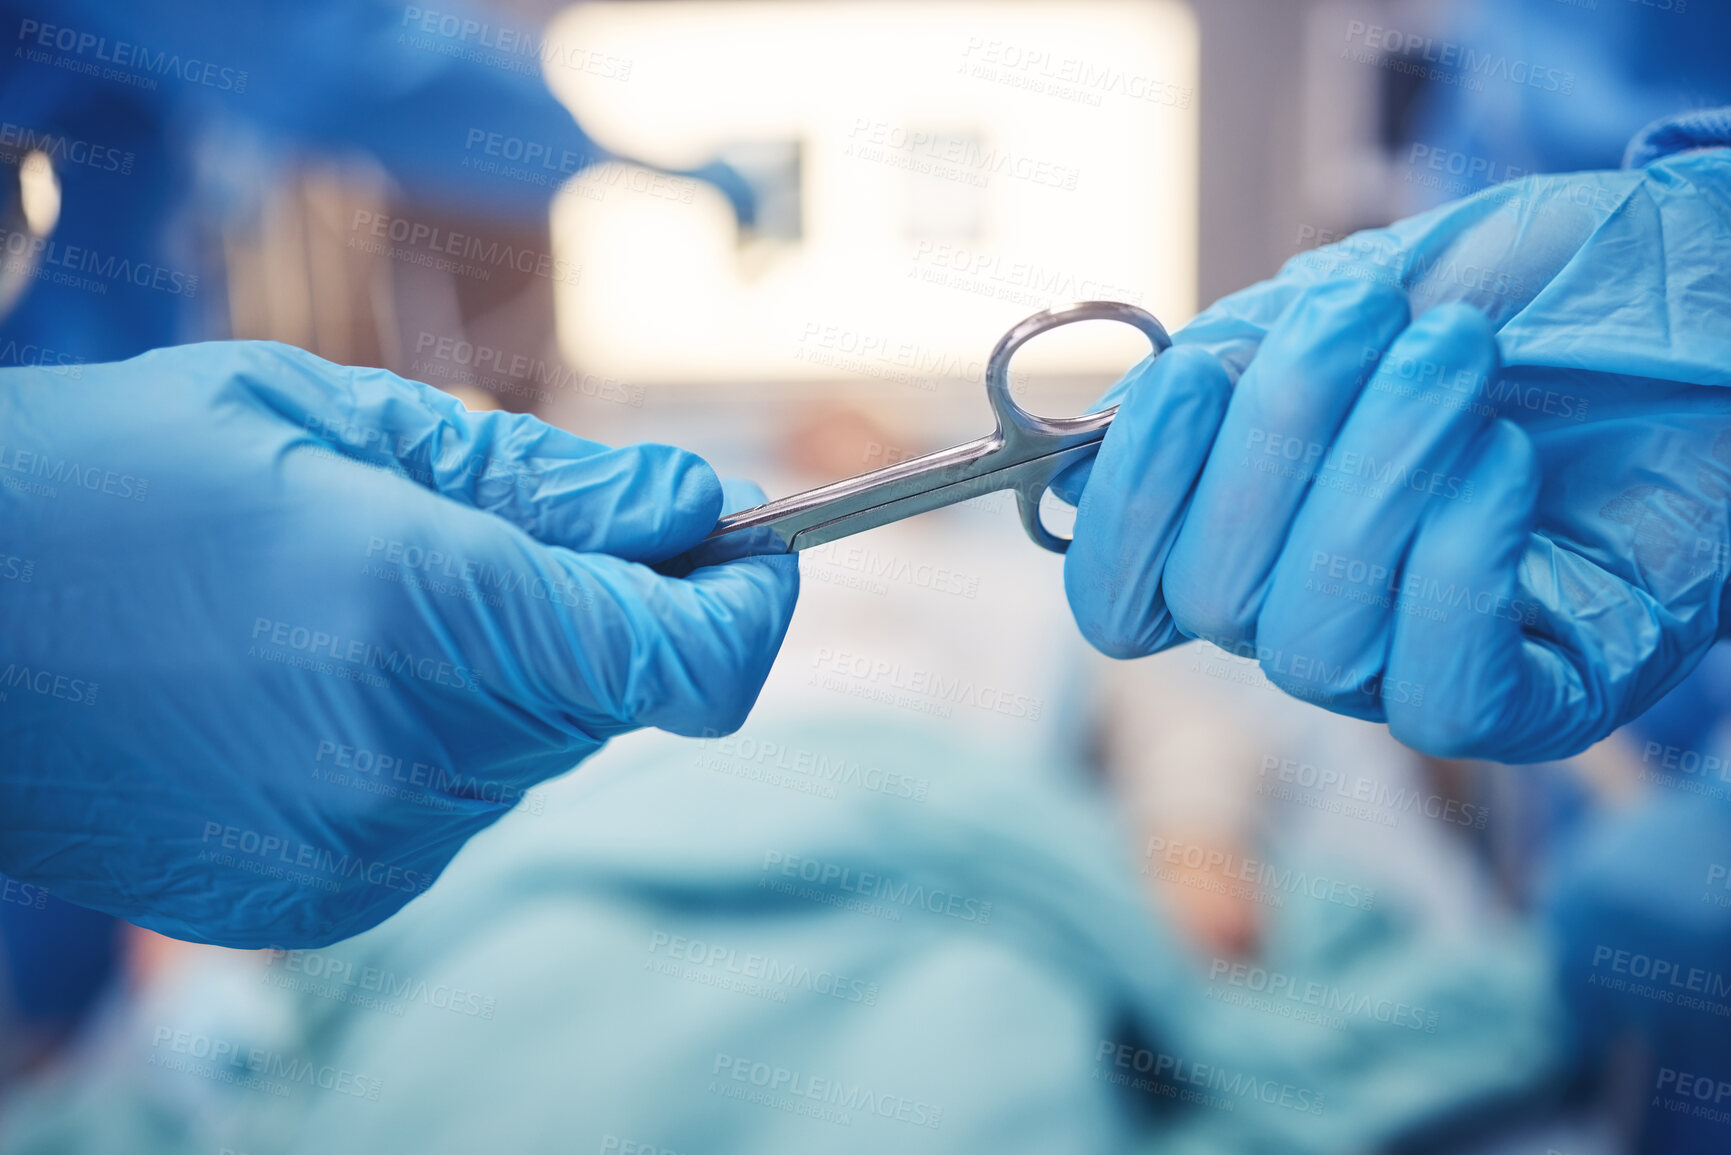 Buy stock photo Hands, scissors for operation and teamwork in the hospital during surgery or emergency medical procedure. Collaboration, healthcare equipment and doctors in theatre together to save a patient closeup